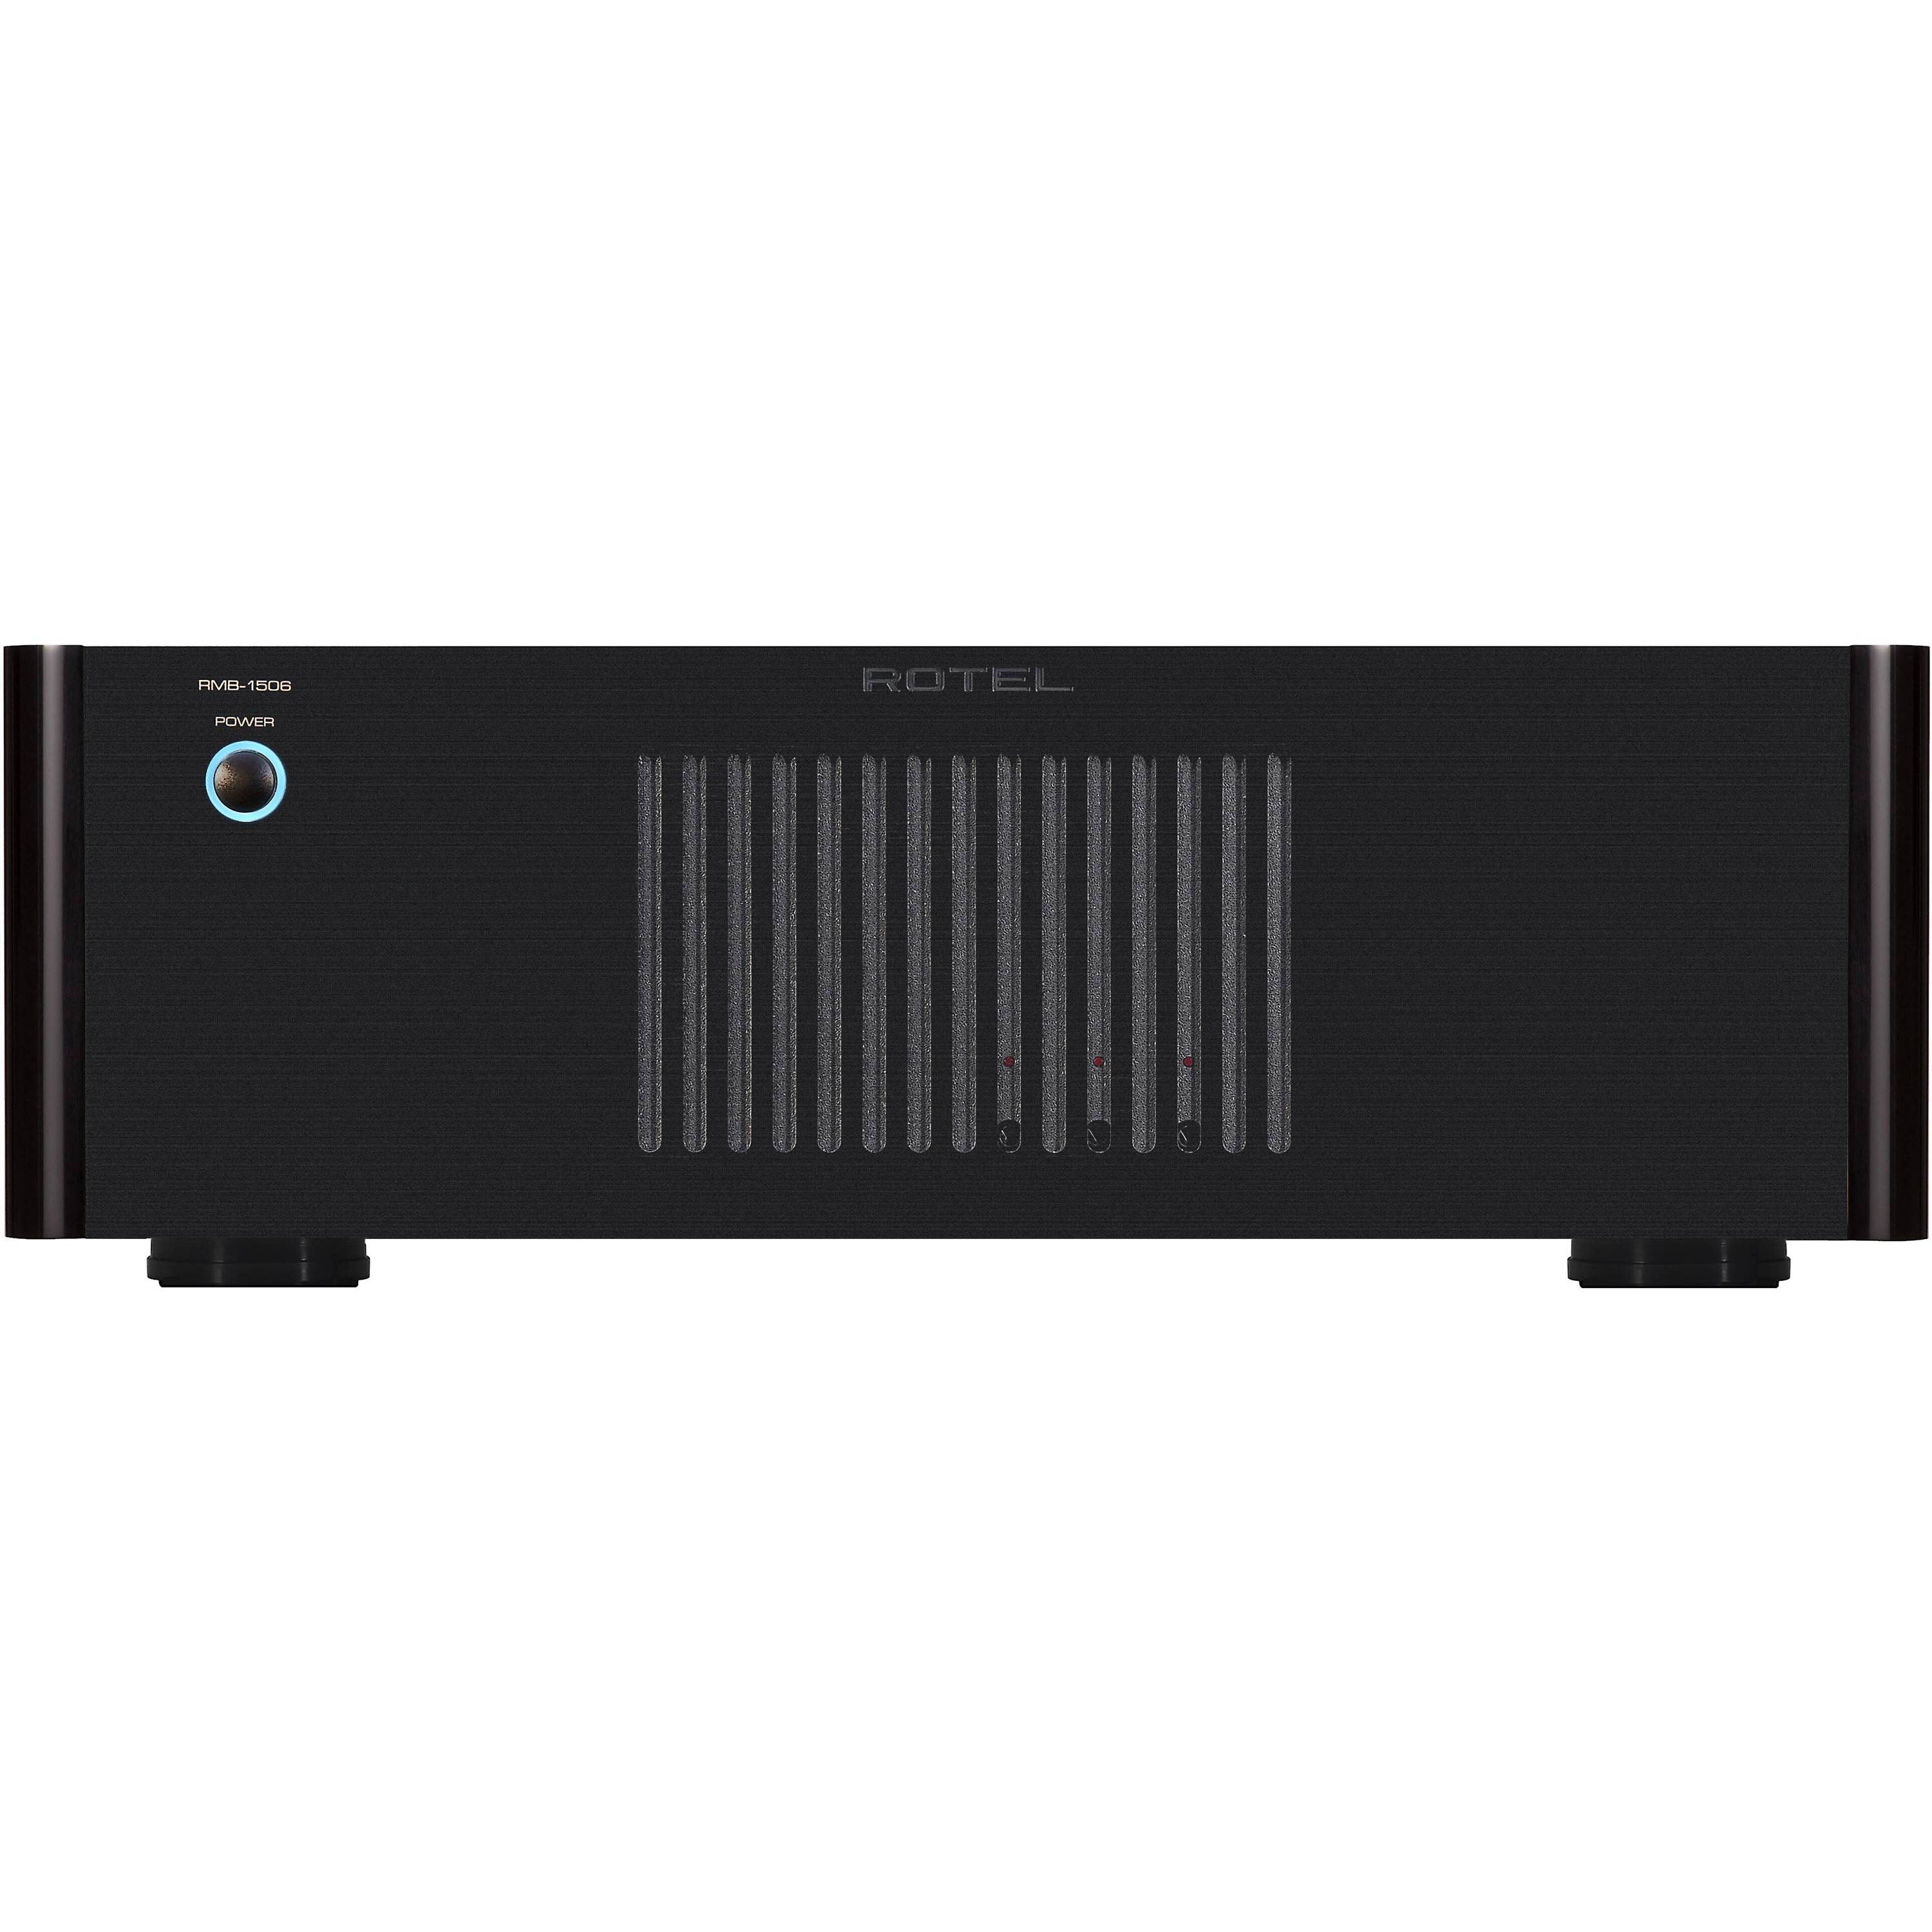 Rotel RMB-1506 6-Channel Distribution Amplifier (black)